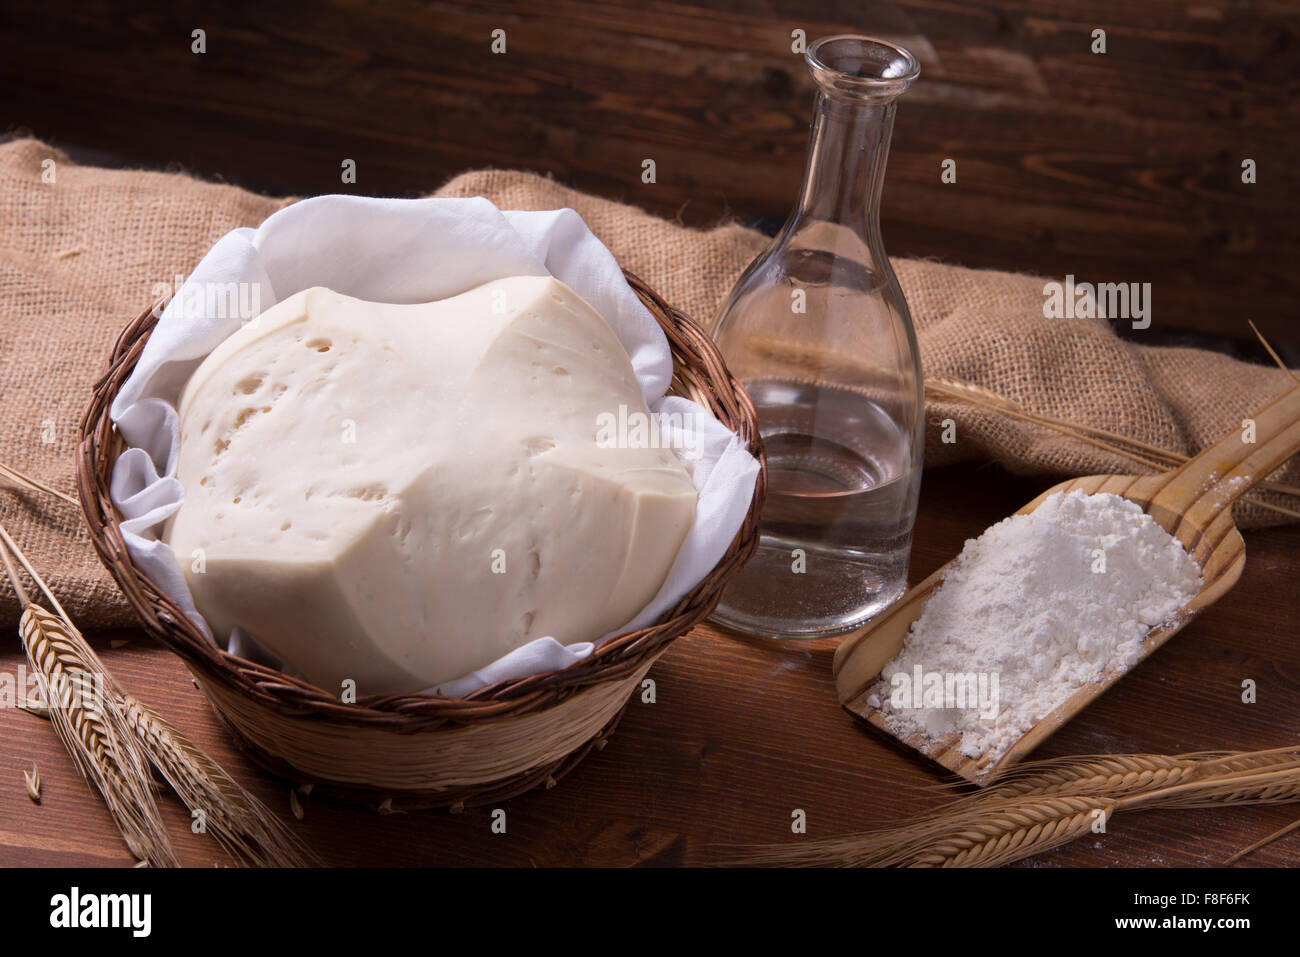 Mother Yeast, Natural Yeast on still life composition with flour and wheat Stock Photo